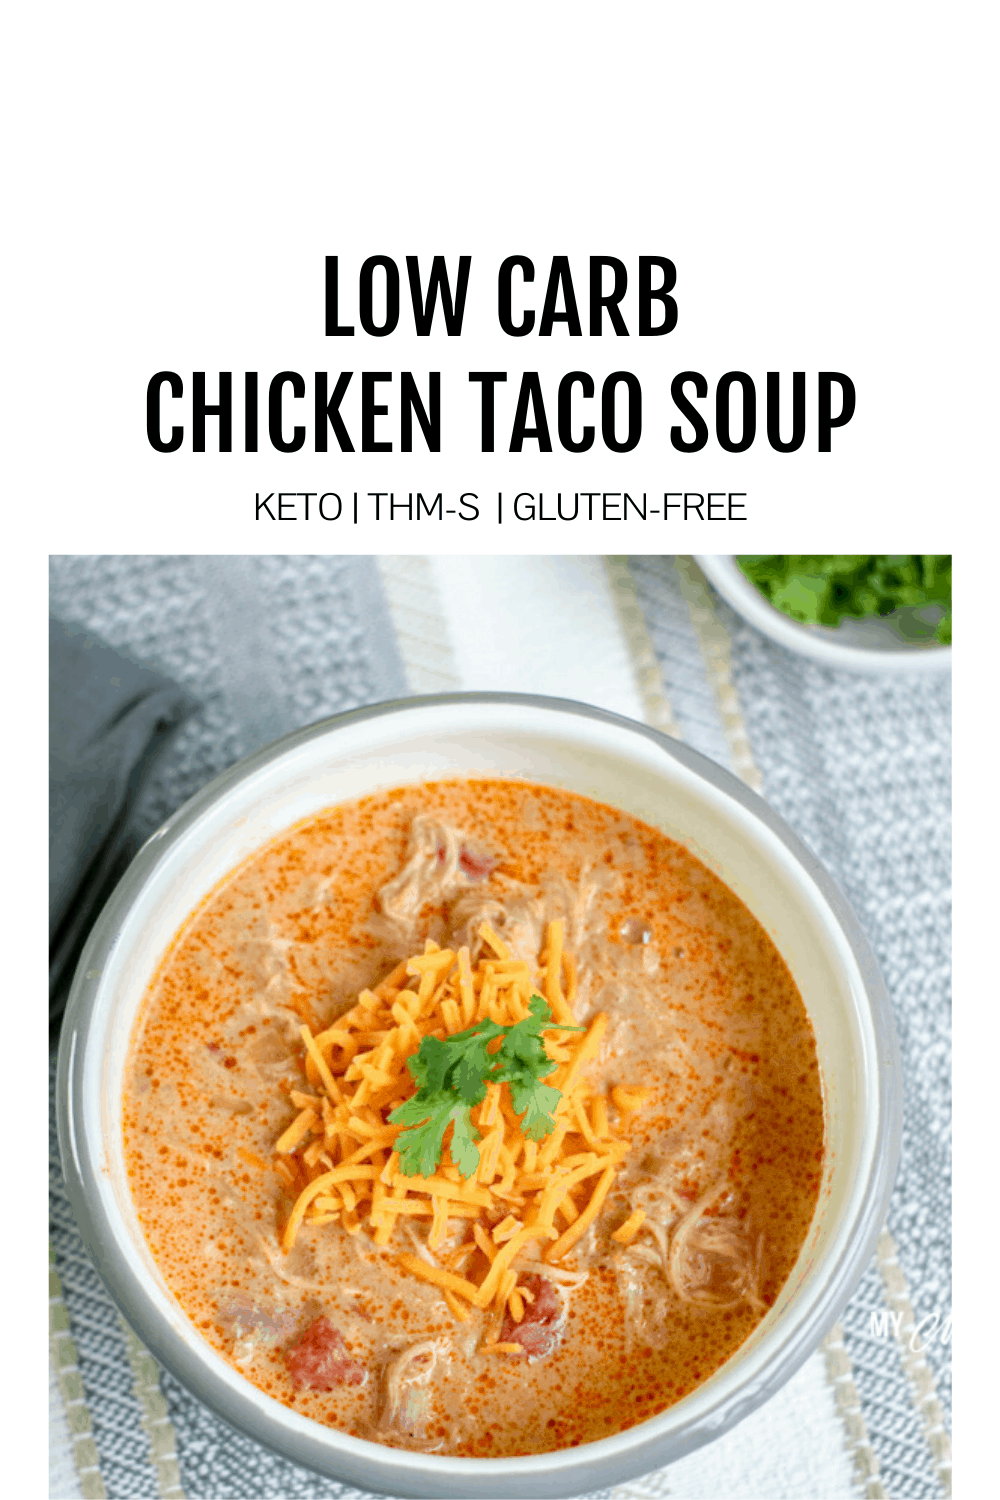 Title image with low carb chicken taco soup